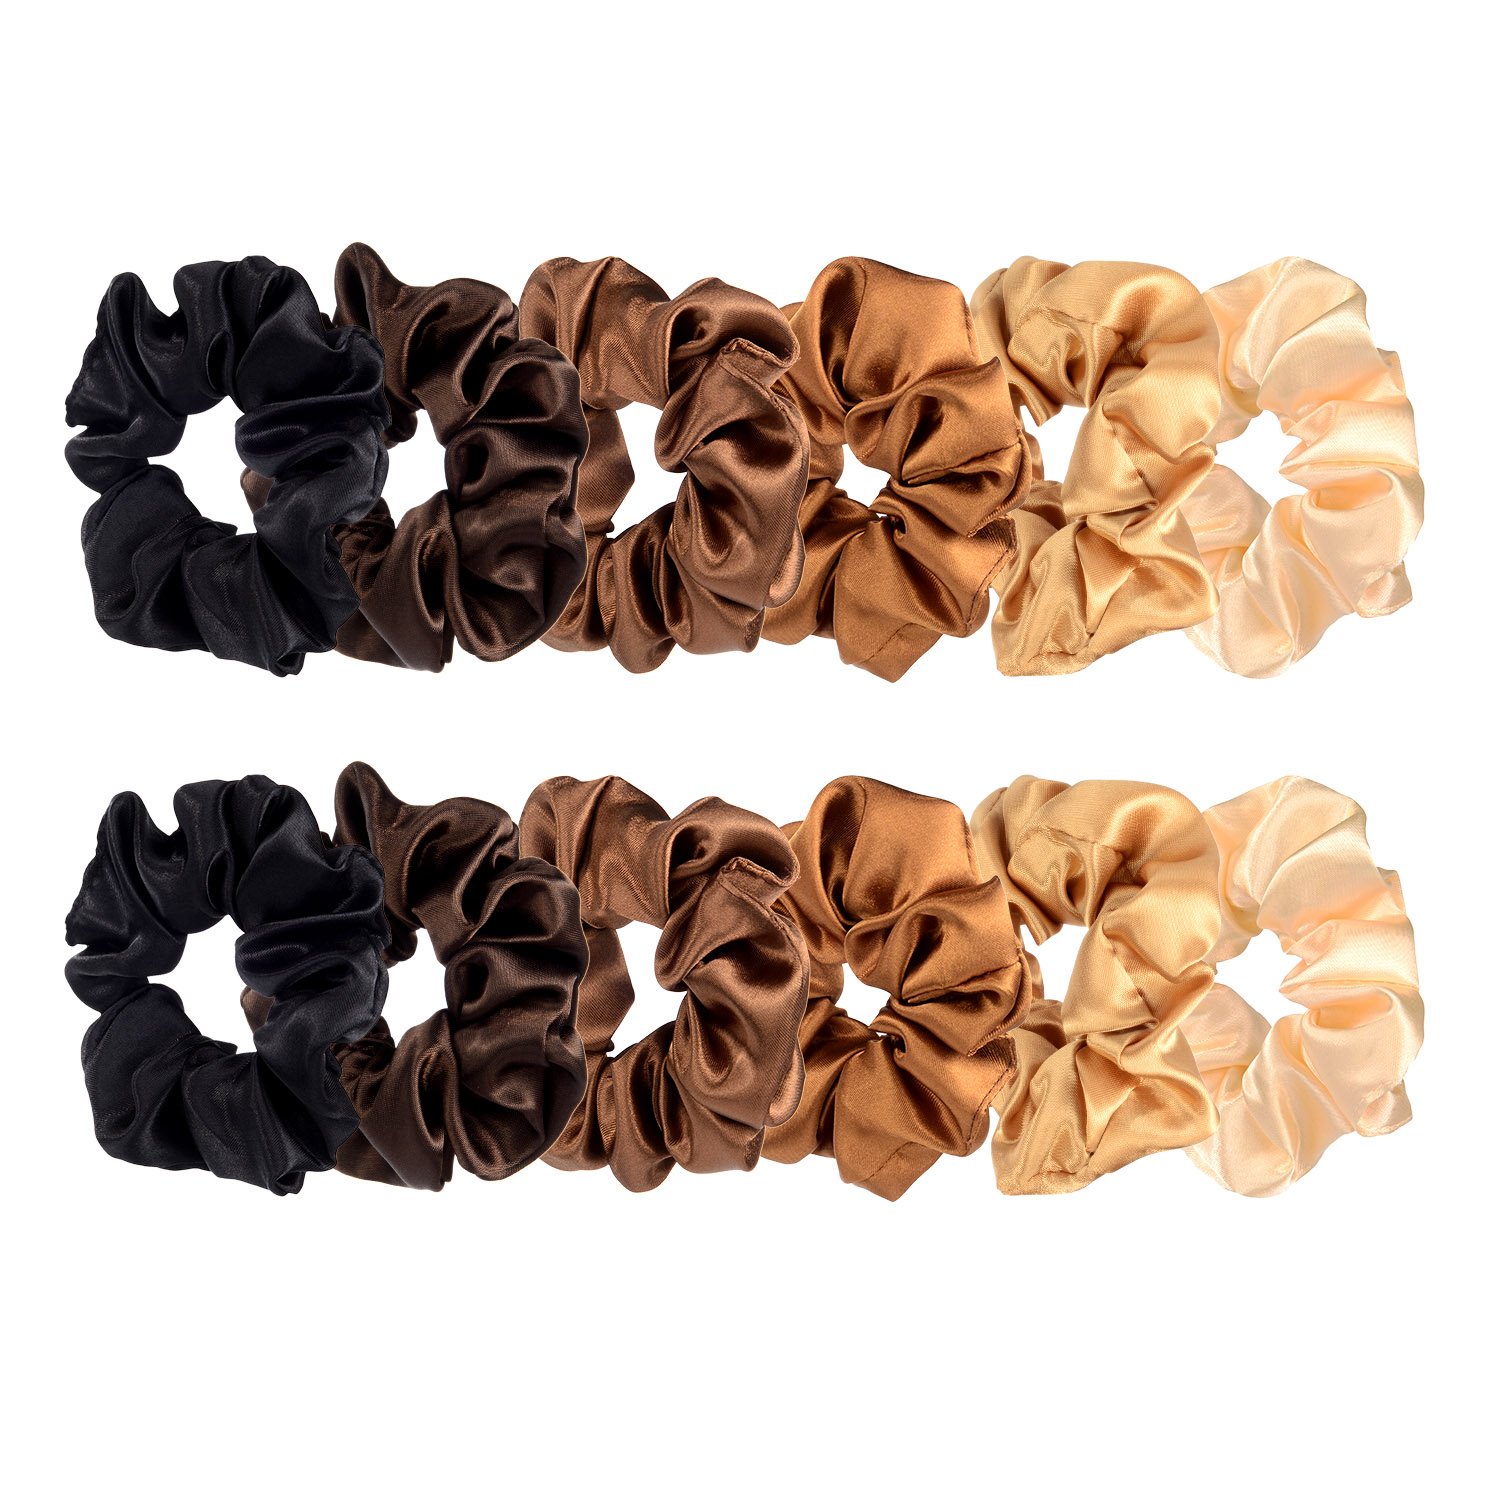 BBTO 12 Pieces 4.3 inch Satin Hair Scrunchies for Women Elastic Hair Bobbles Scrunchies Hair Ties for Kids Adults, Big Scrunchy Ponytail Holder with Elastic Bands Girls Thick Thin Curly 6 Colors